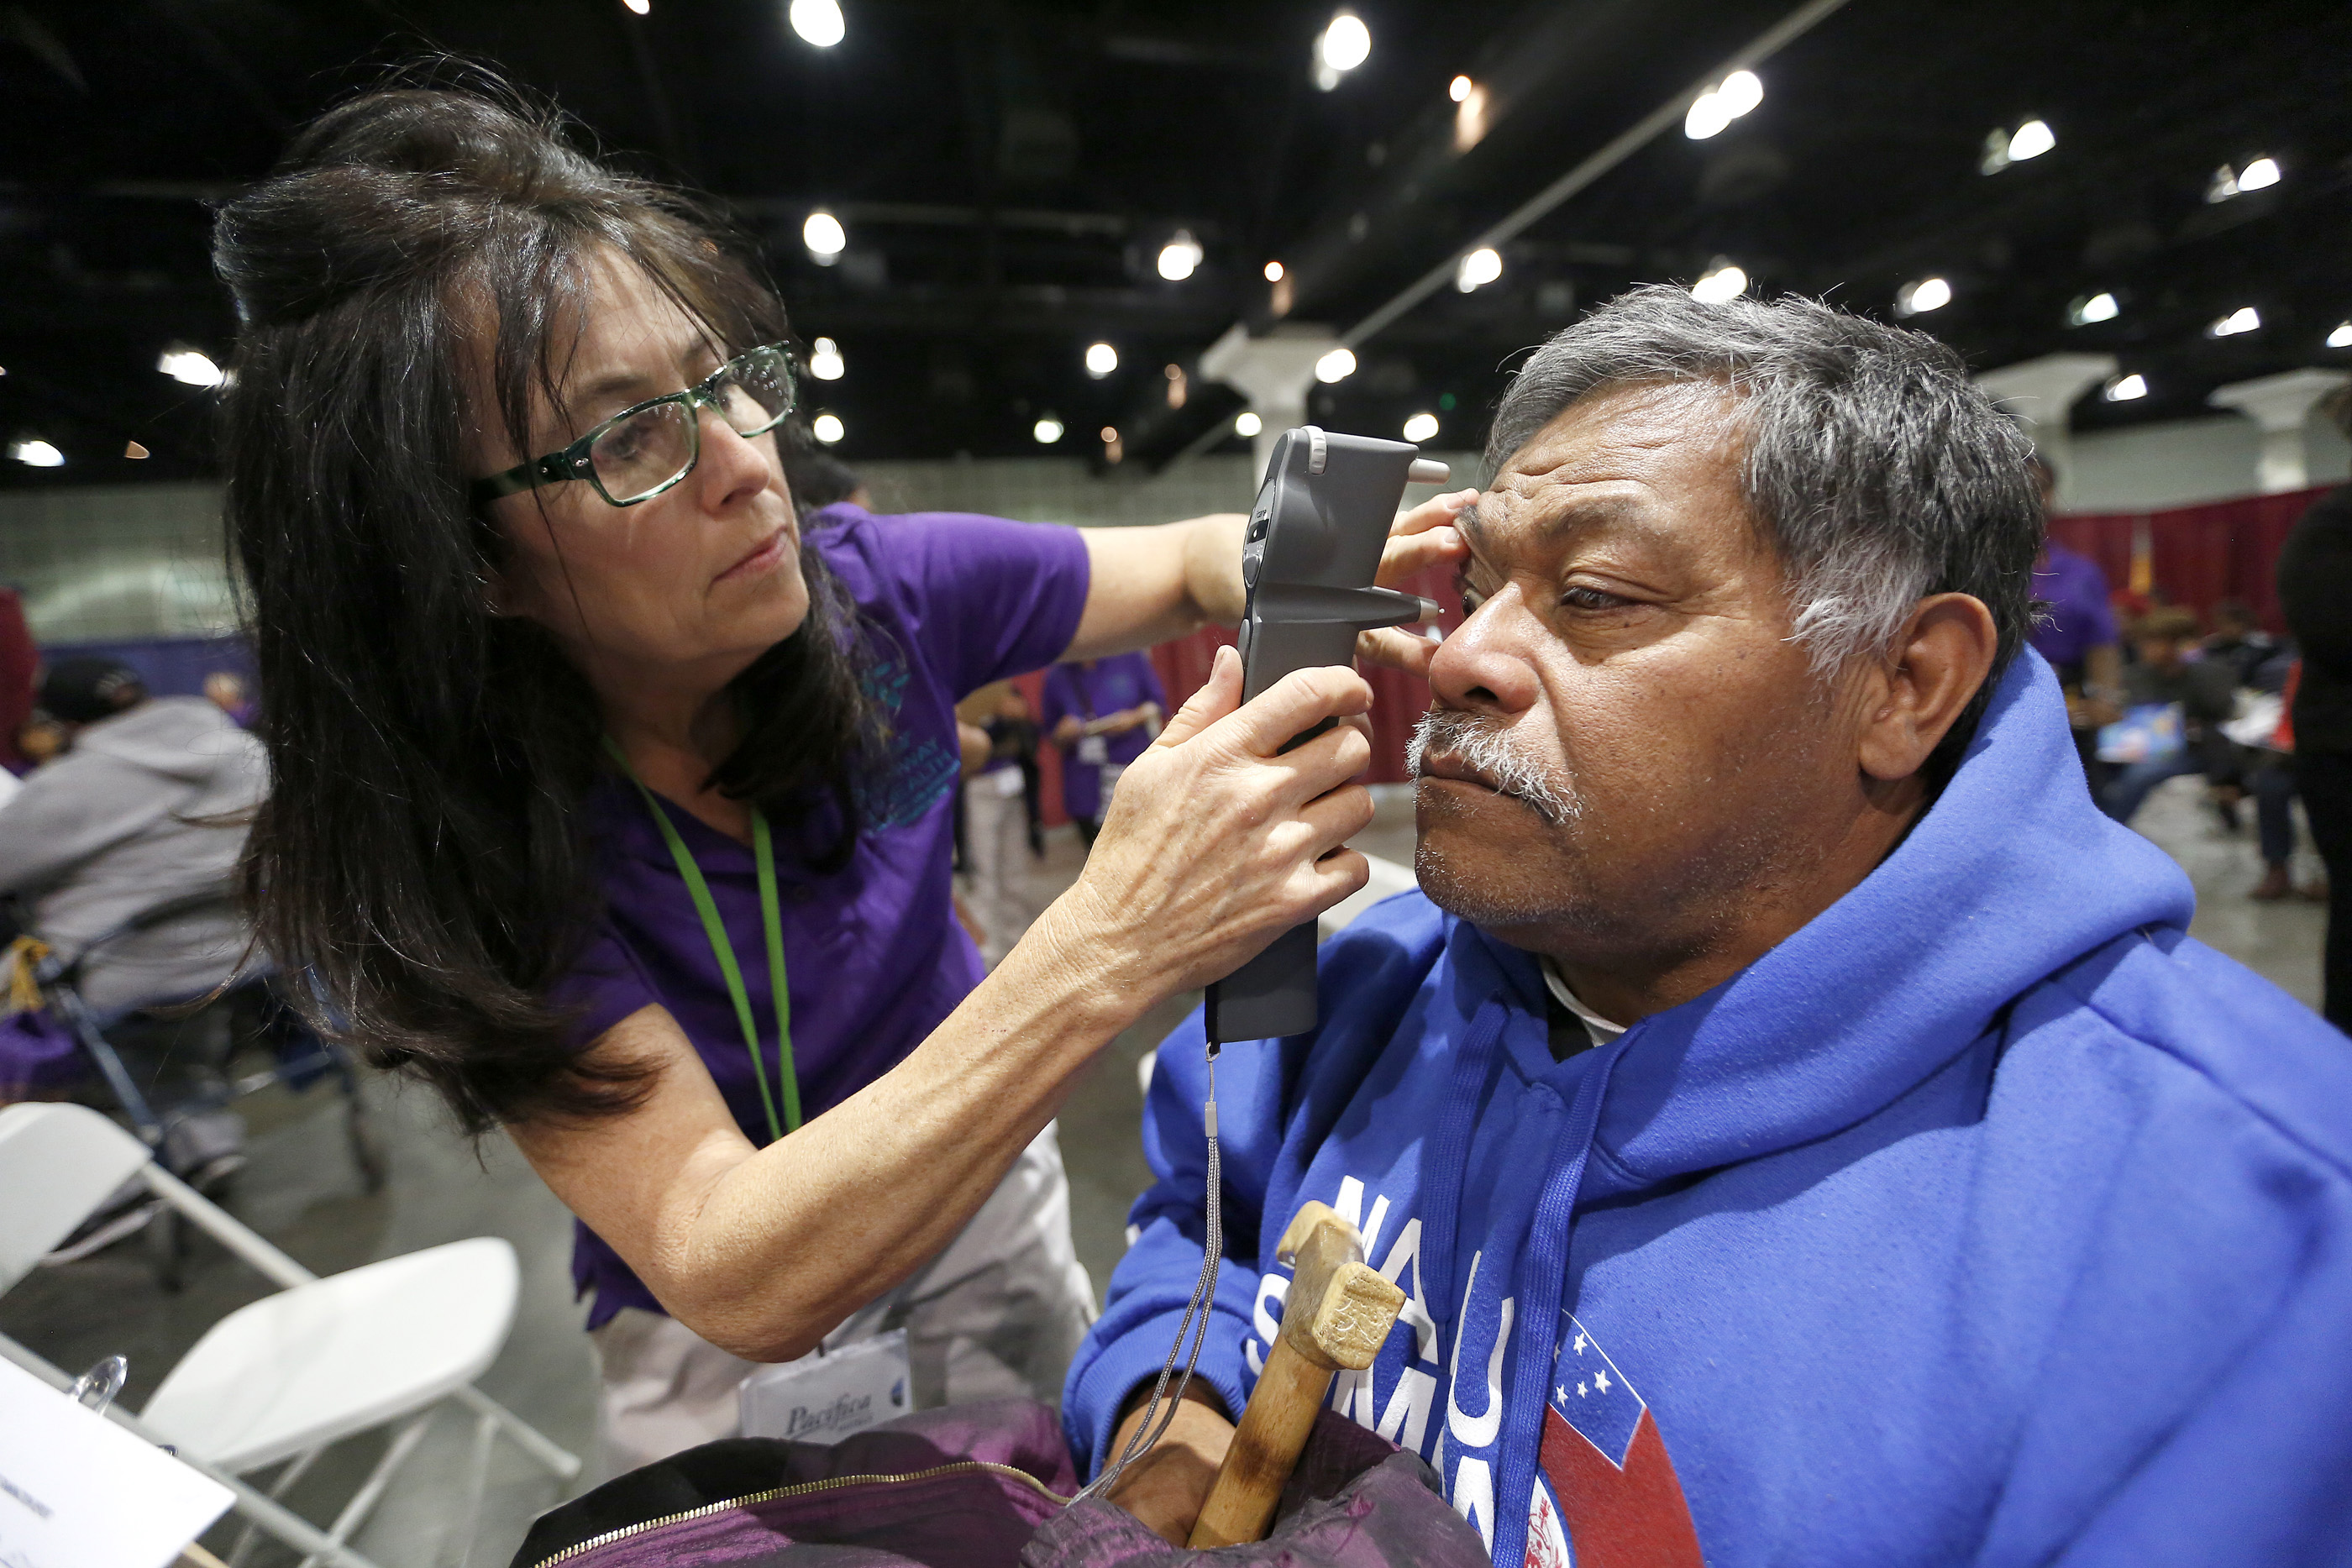 04/27/16/ LOS ANGELES/ The three-day health care clinic opened today at the Los Angeles Convention Center plans to offer free medical care to all patients who show up from 7 a.m. to 4 p.m. Wednesday and Thursday, and from 7 a.m. to noon on Friday. Nearly 12,000 patients are expected to be treated and receive free services that would include crowns, root canals and extractions in the dental arena. Pediatrics, vaccinations, varied gynecologic procedures, echocardiograms, EKGs and more, according to the Your Best Pathway to Health. (Photo Aurelia Ventura/ La Opinion)